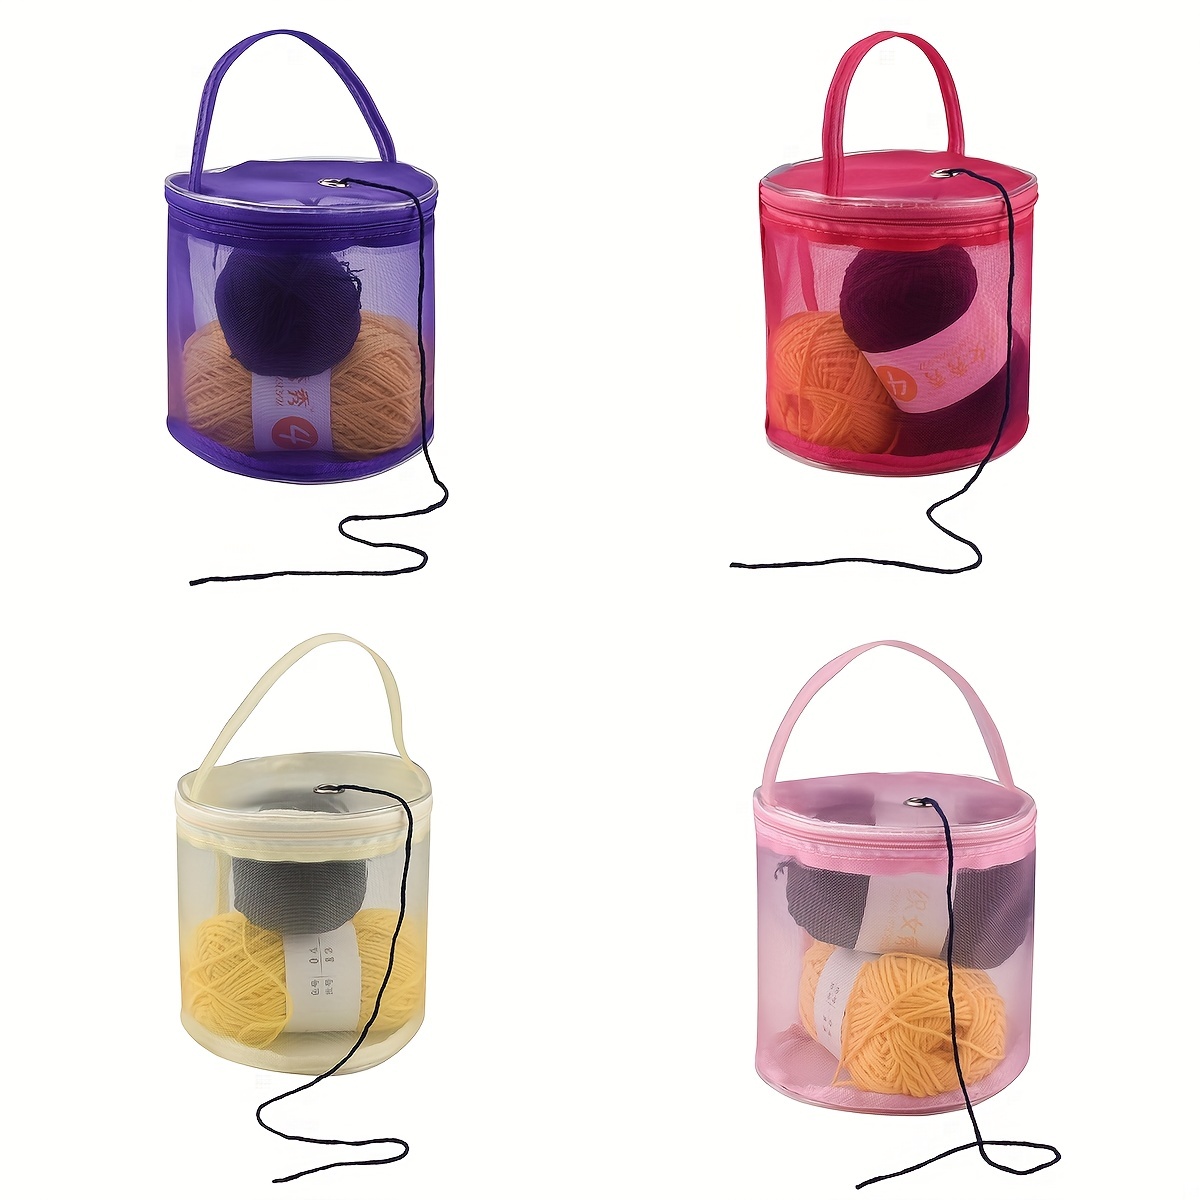 Portable Yarn Storage Bag Organizer with Divider for Crocheting